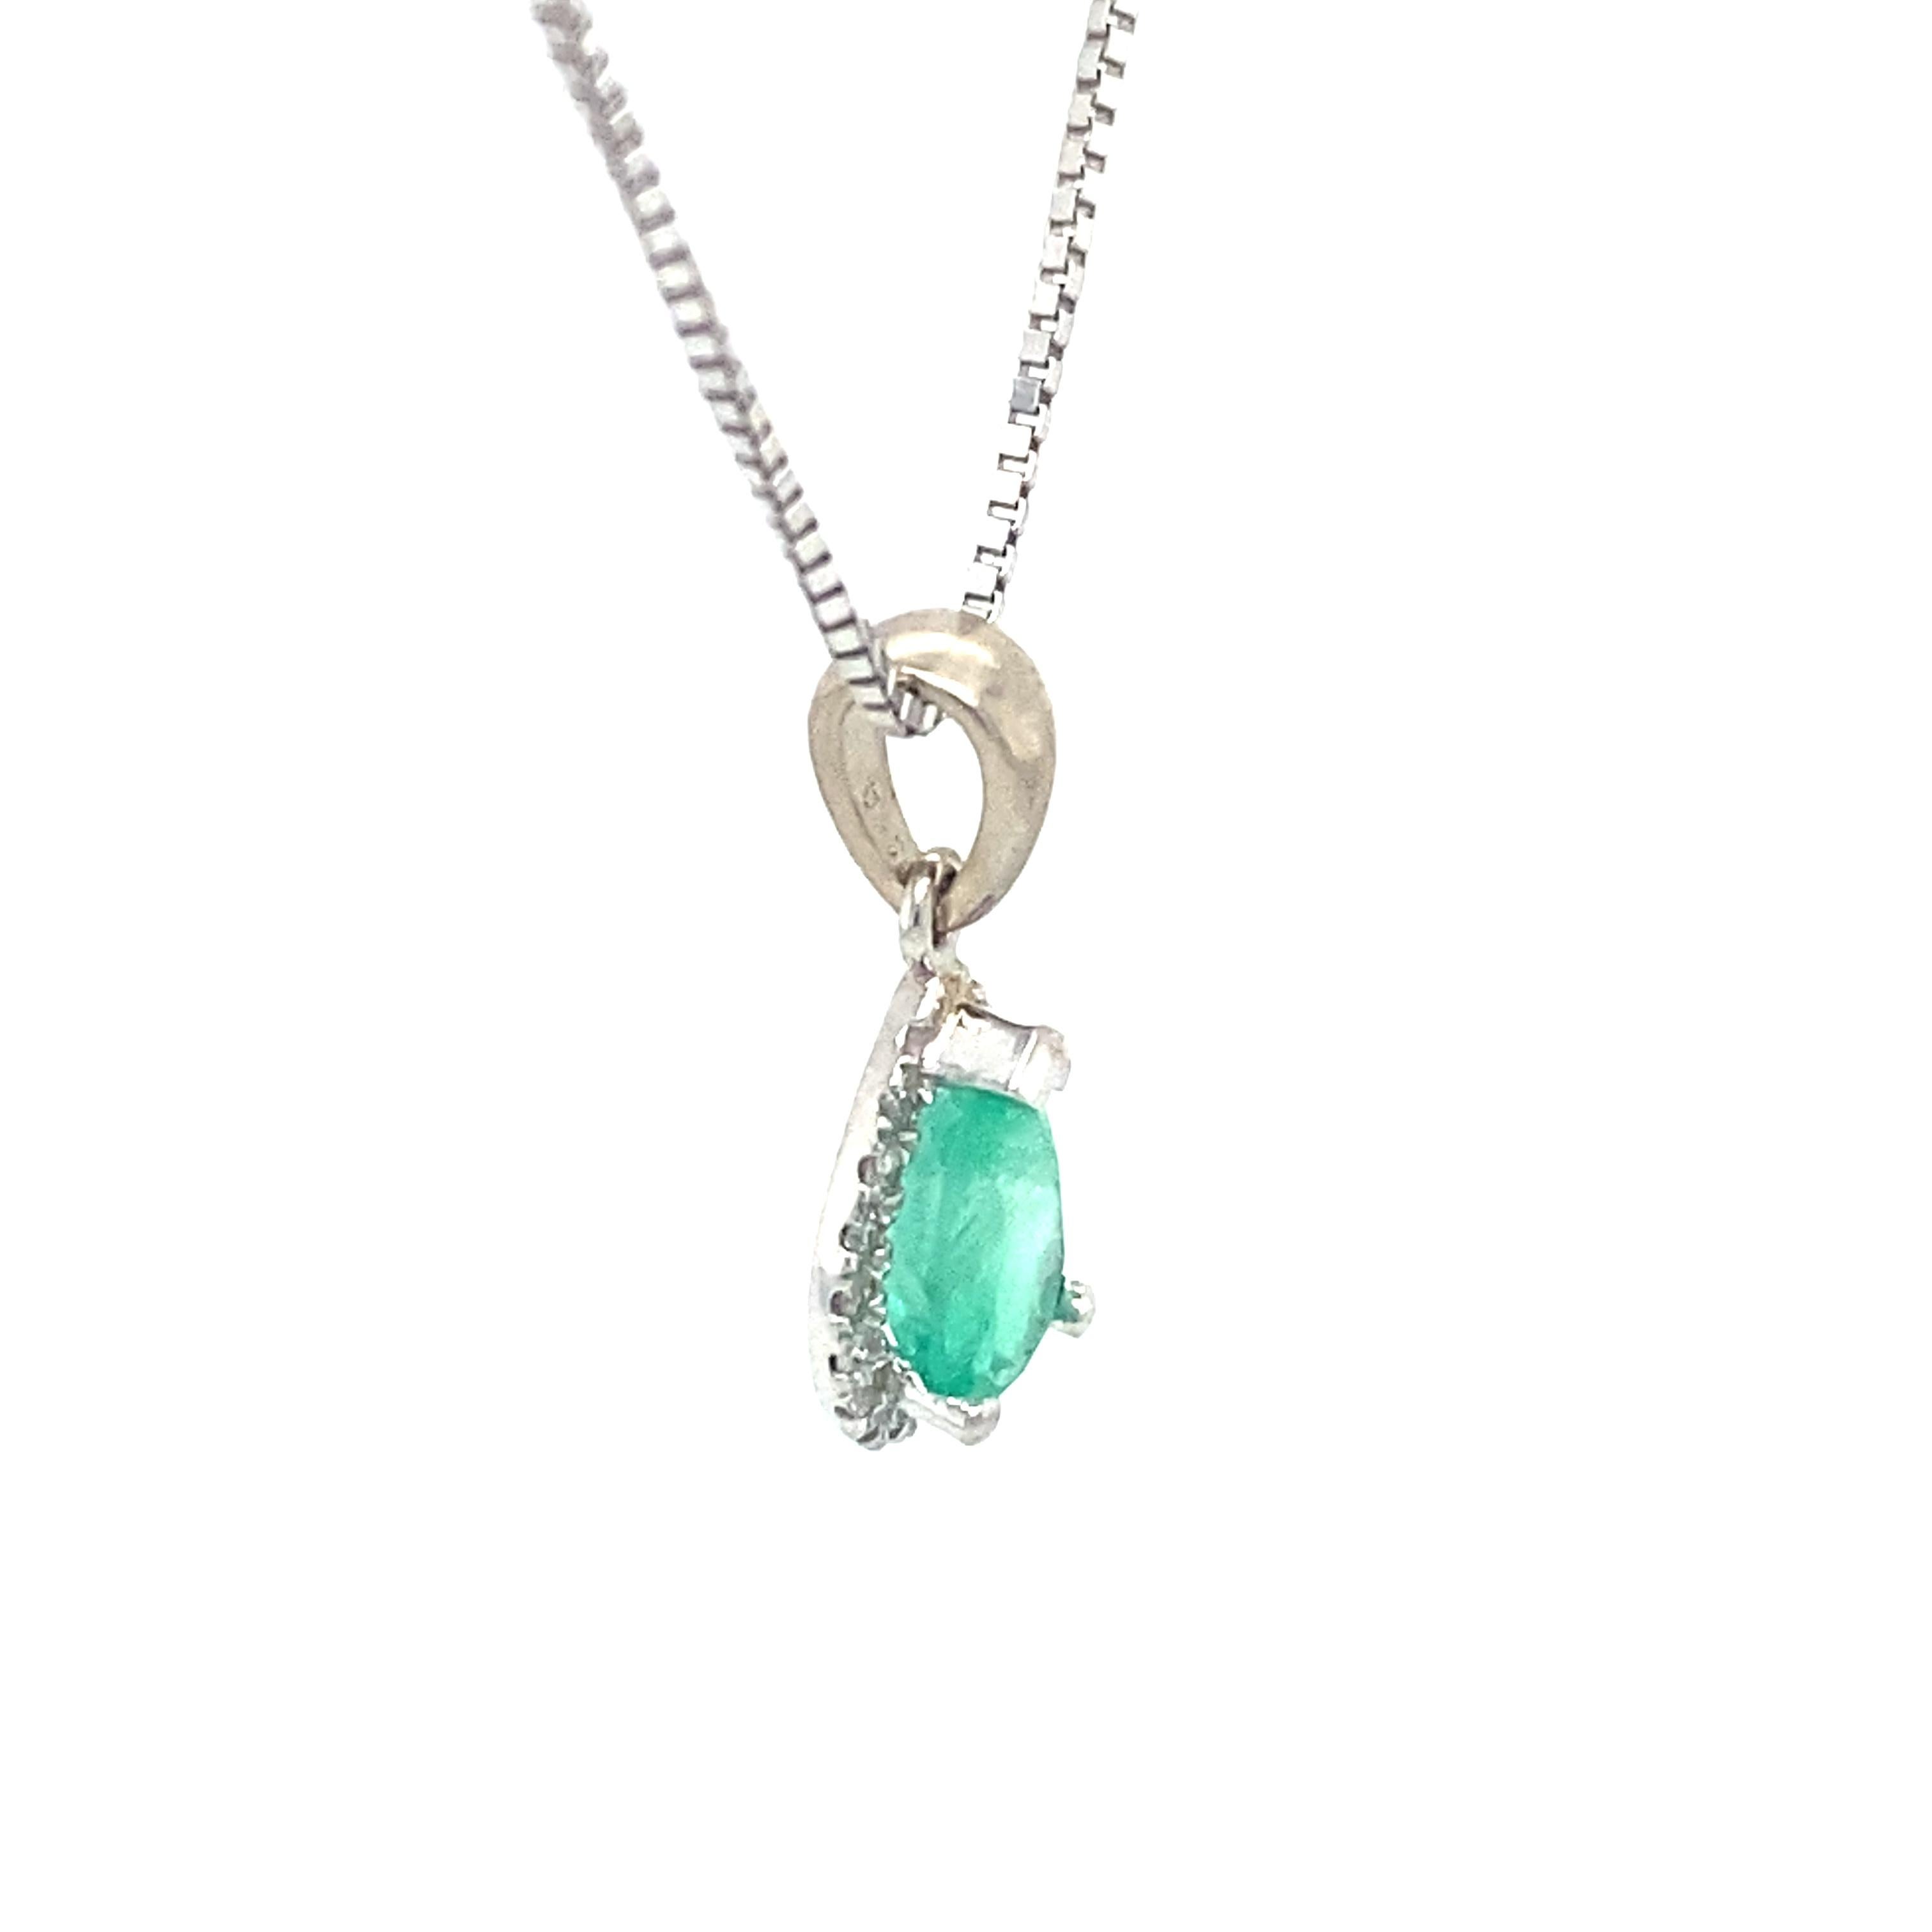 Modern 0.88 Carat Pear Cut Emerald and Diamond Pendant Necklace in 14 Karat White Gold For Sale